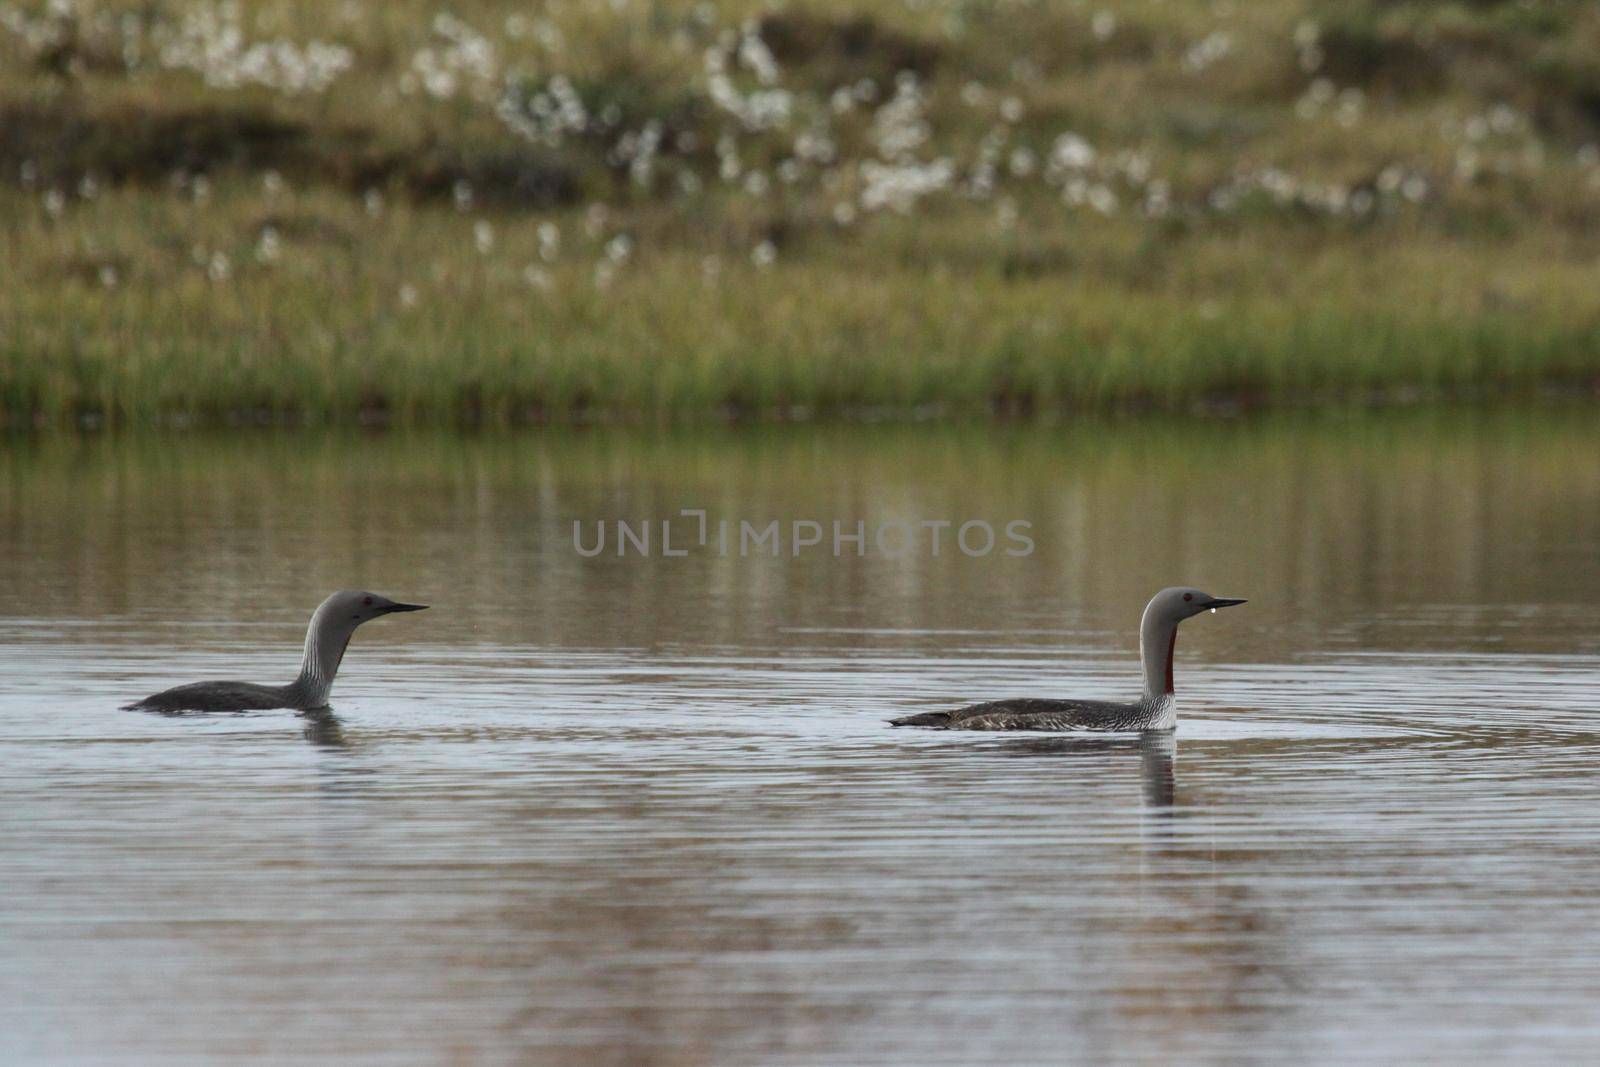 Red-throated loon swimming in blue arctic waters with tundra grass in the background by Granchinho